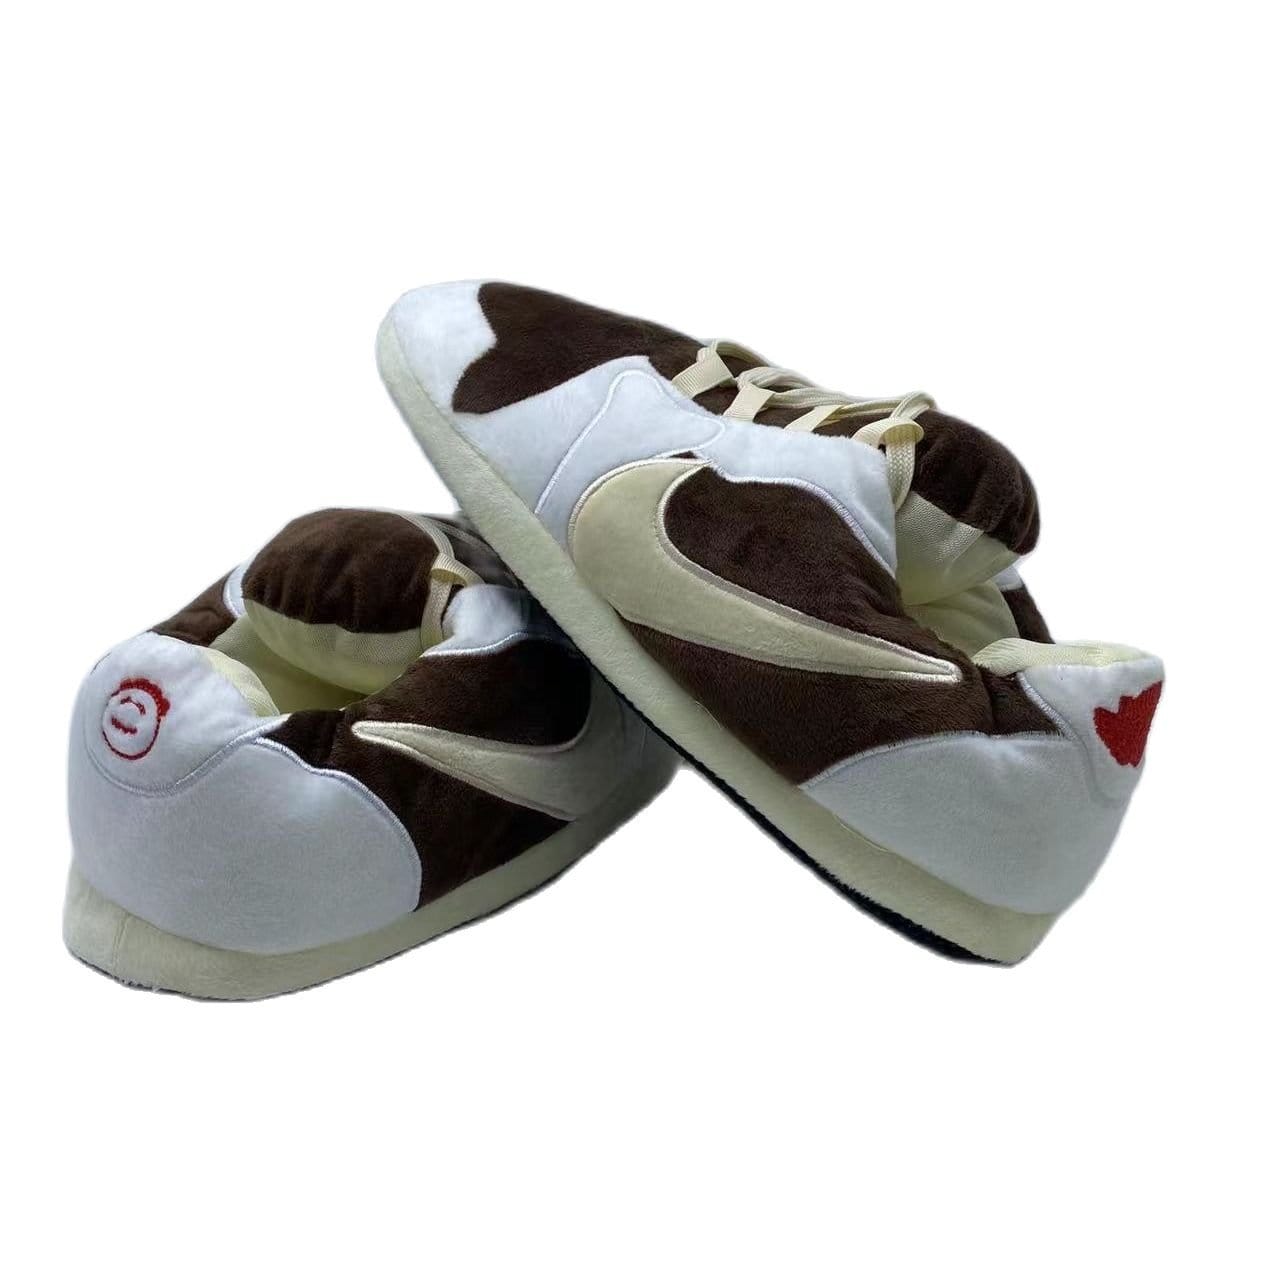 Slip Kickz  Slippers One Size Fits All ( UK 3 - 10.5 ) White and Brown Travis Scott Lows Novelty Slippers